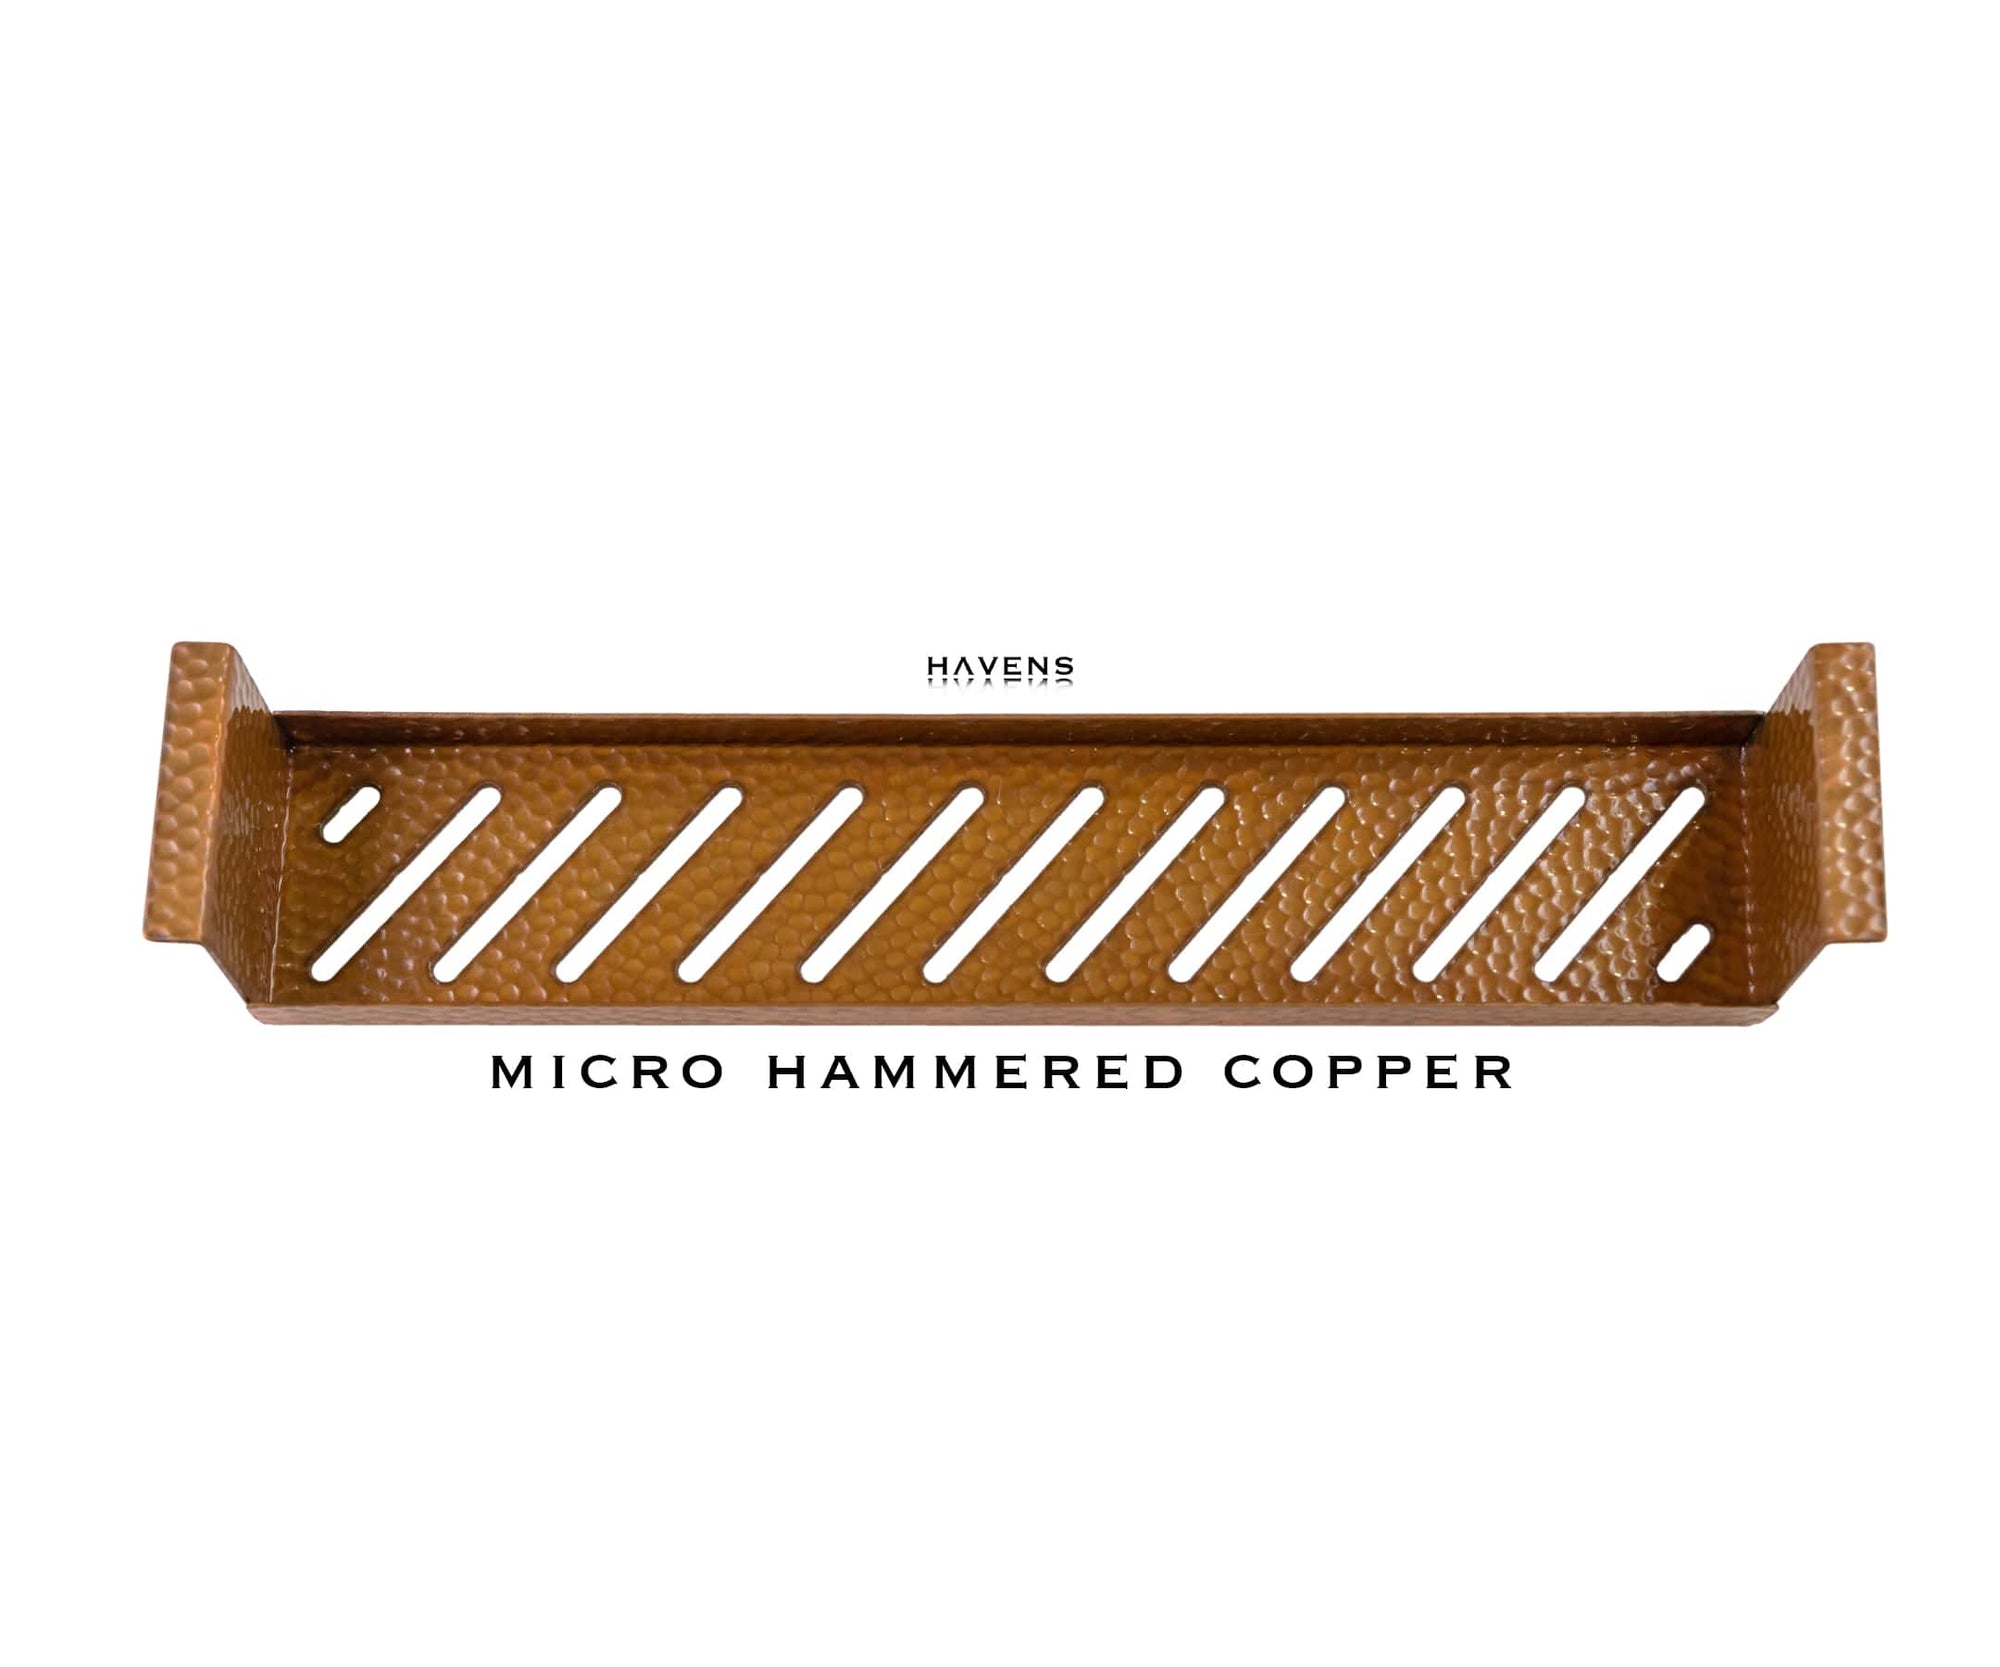 Copper Drying Rack - Havens